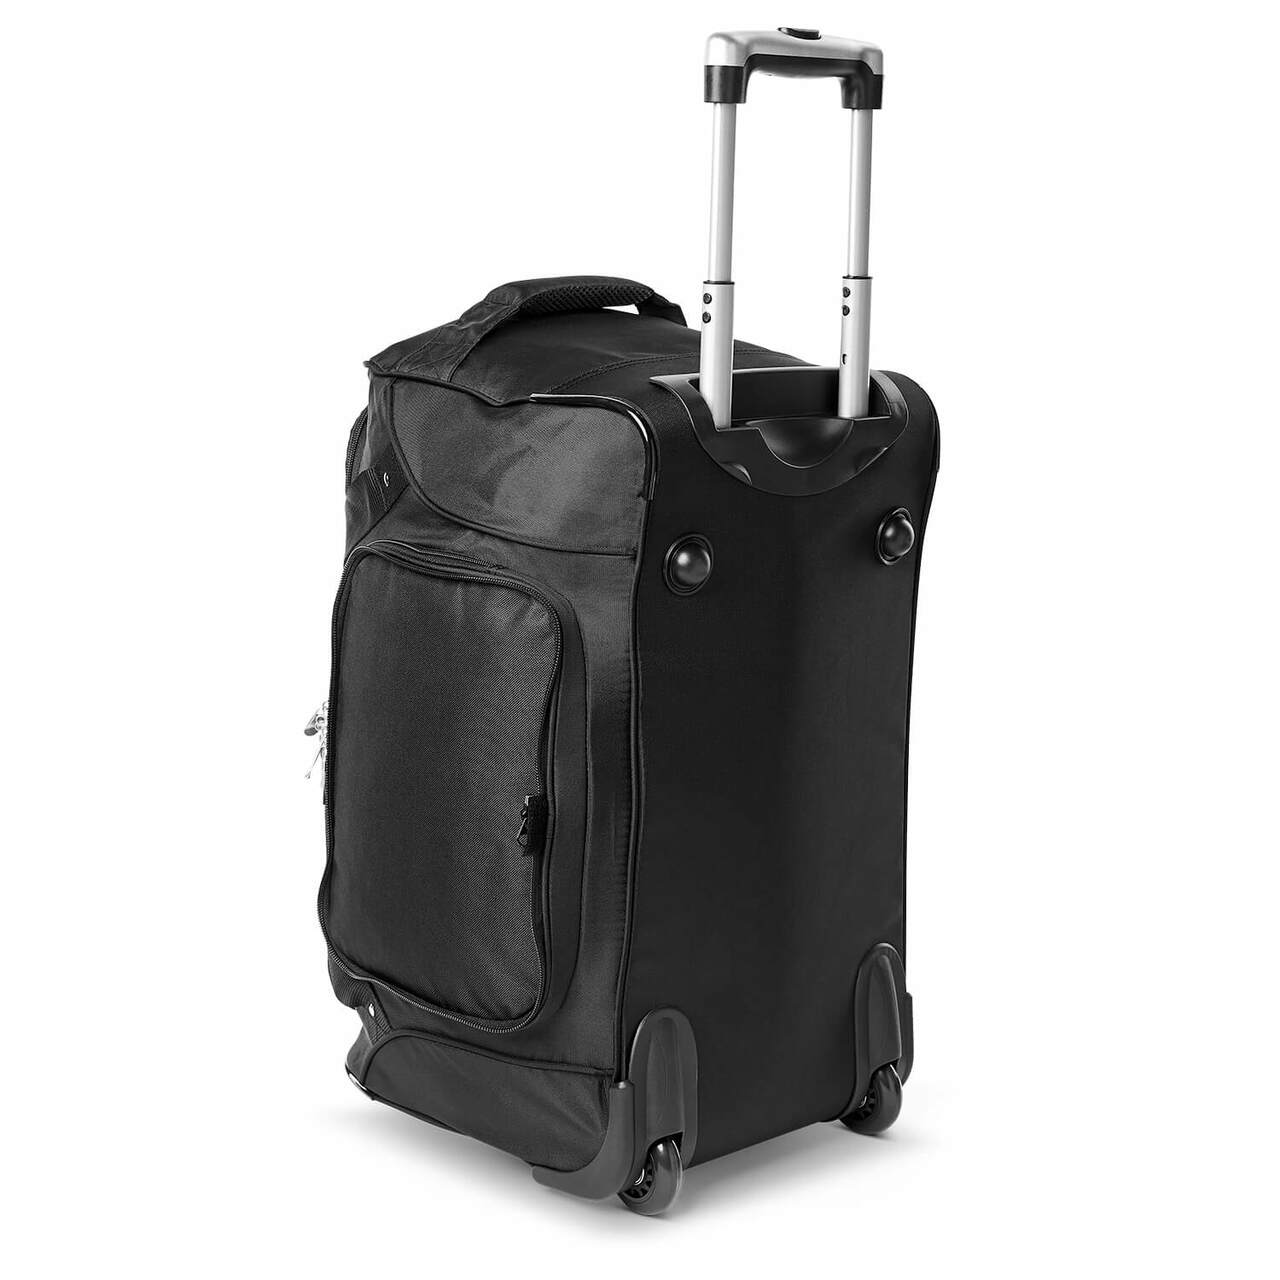 Stanford Cardinal Luggage | Stanford Cardinal Wheeled Carry On Luggage